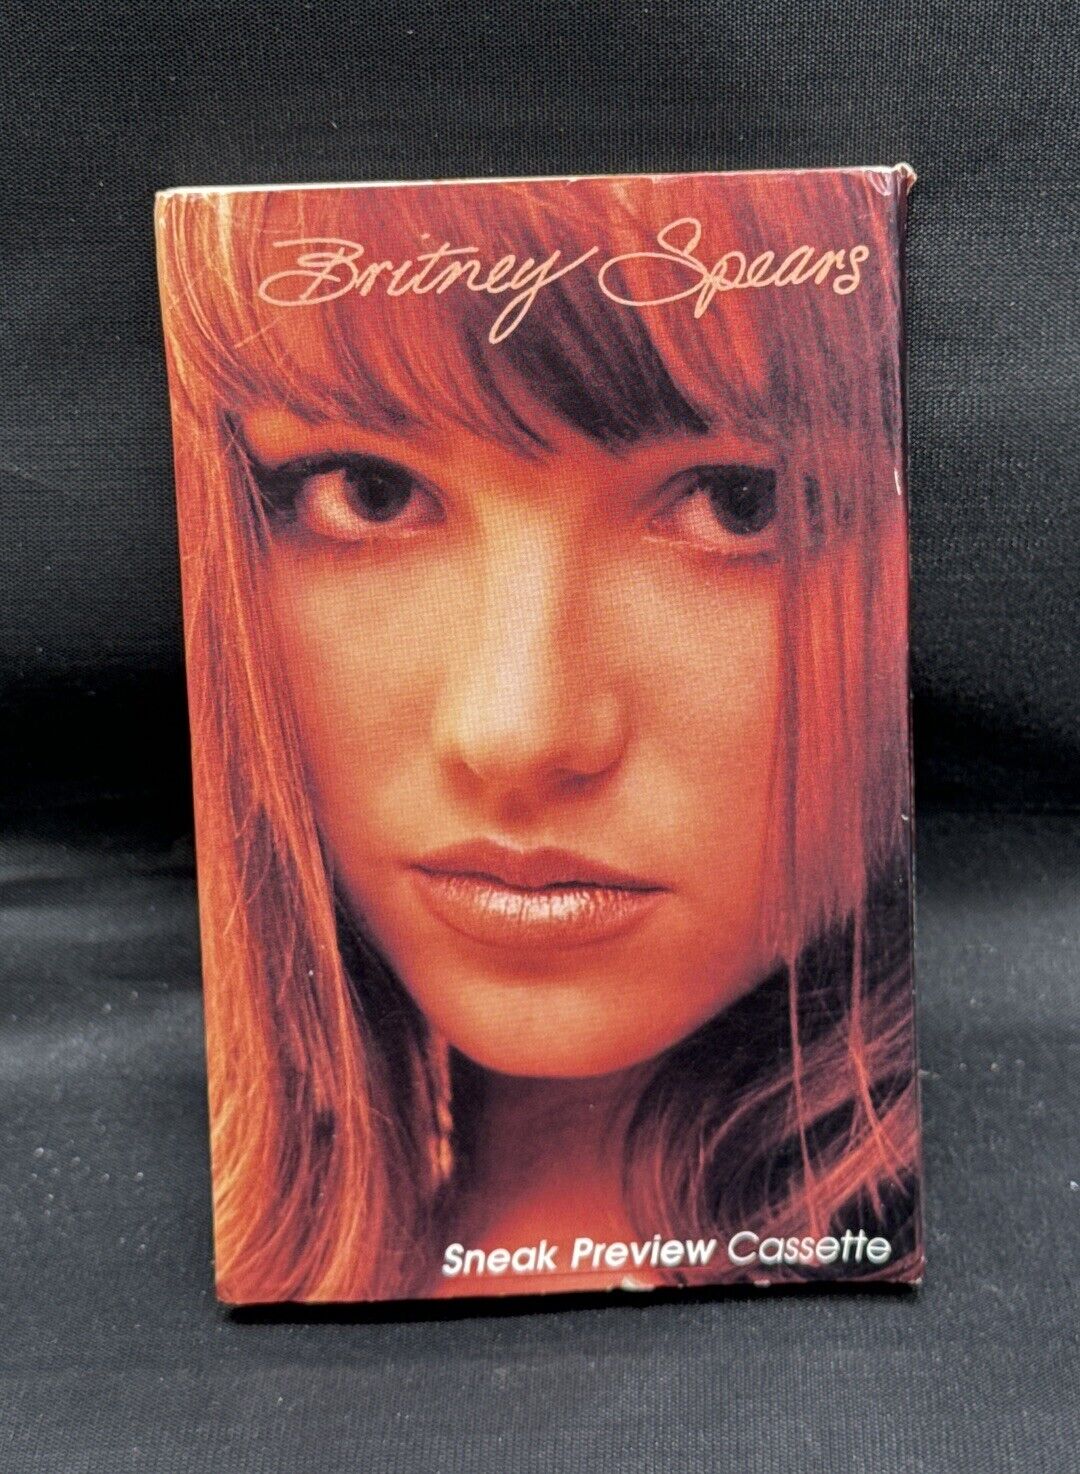 Promo Britney Spears Sneak Preview Cassette Tape Vintage Baby One More Time